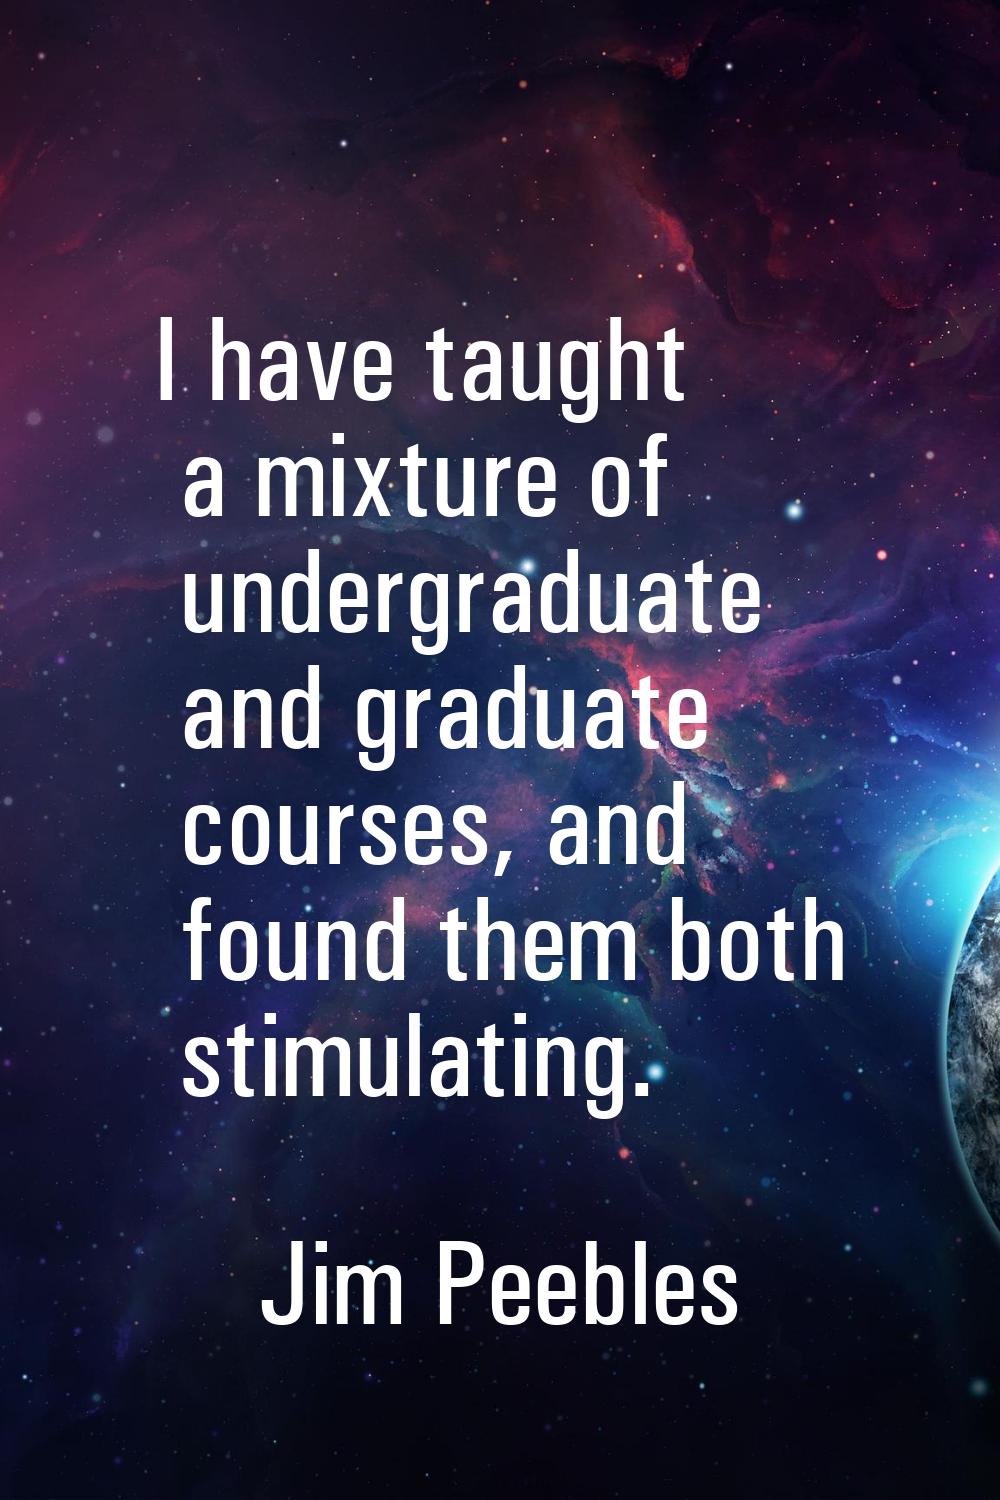 I have taught a mixture of undergraduate and graduate courses, and found them both stimulating.